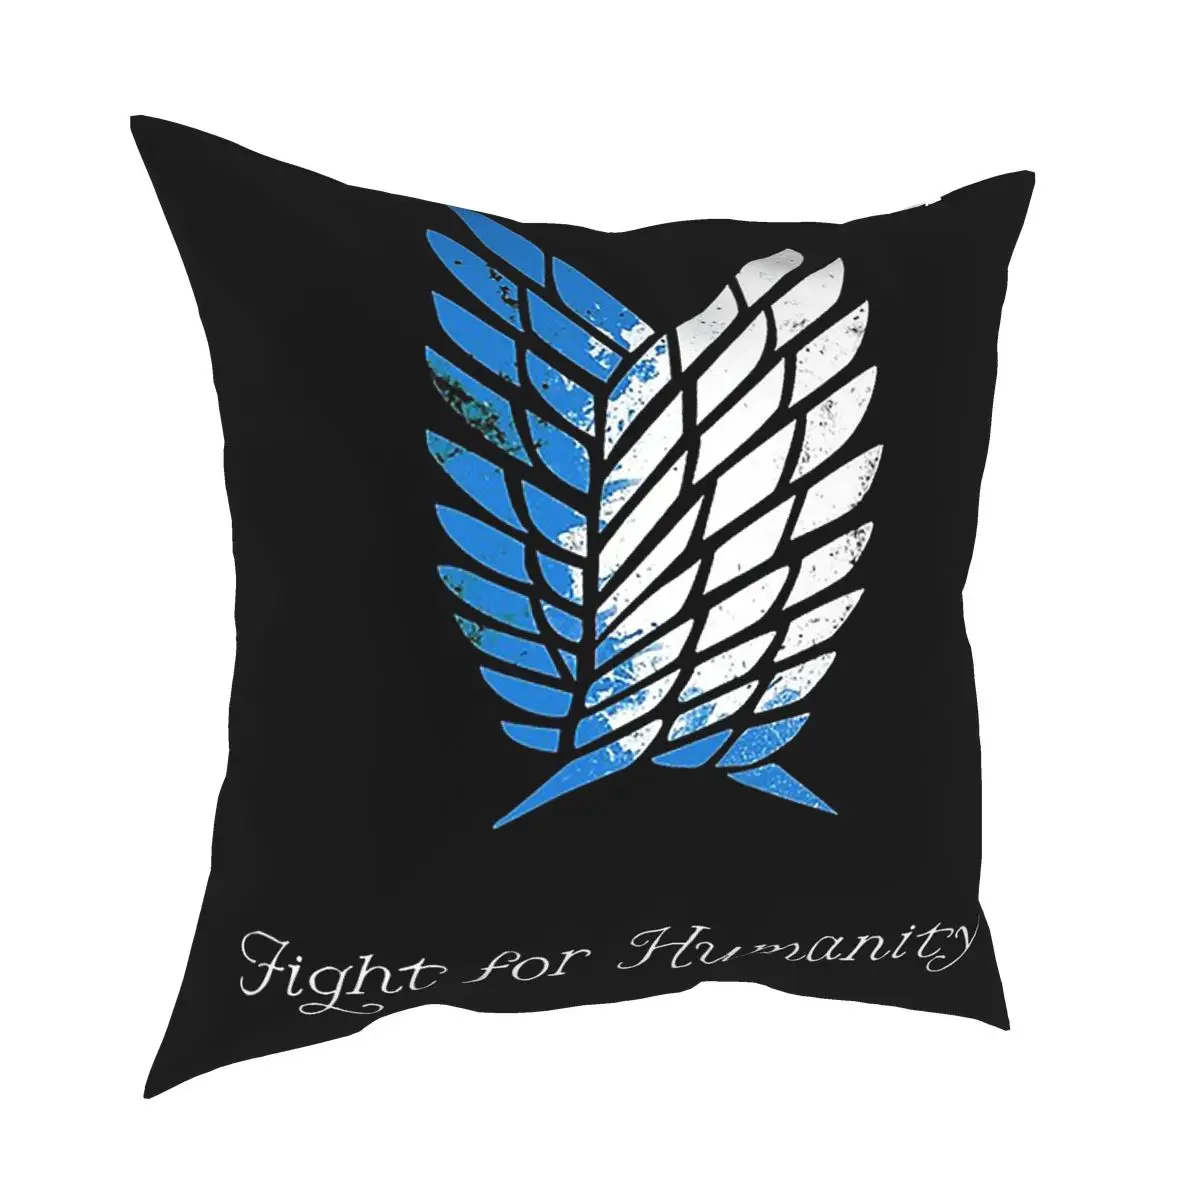 

Fight For Humanity Pillowcase Soft Fabric Cushion Cover Decorative Attack on Titan Throw Pillow Case Cover Home 45X45cm